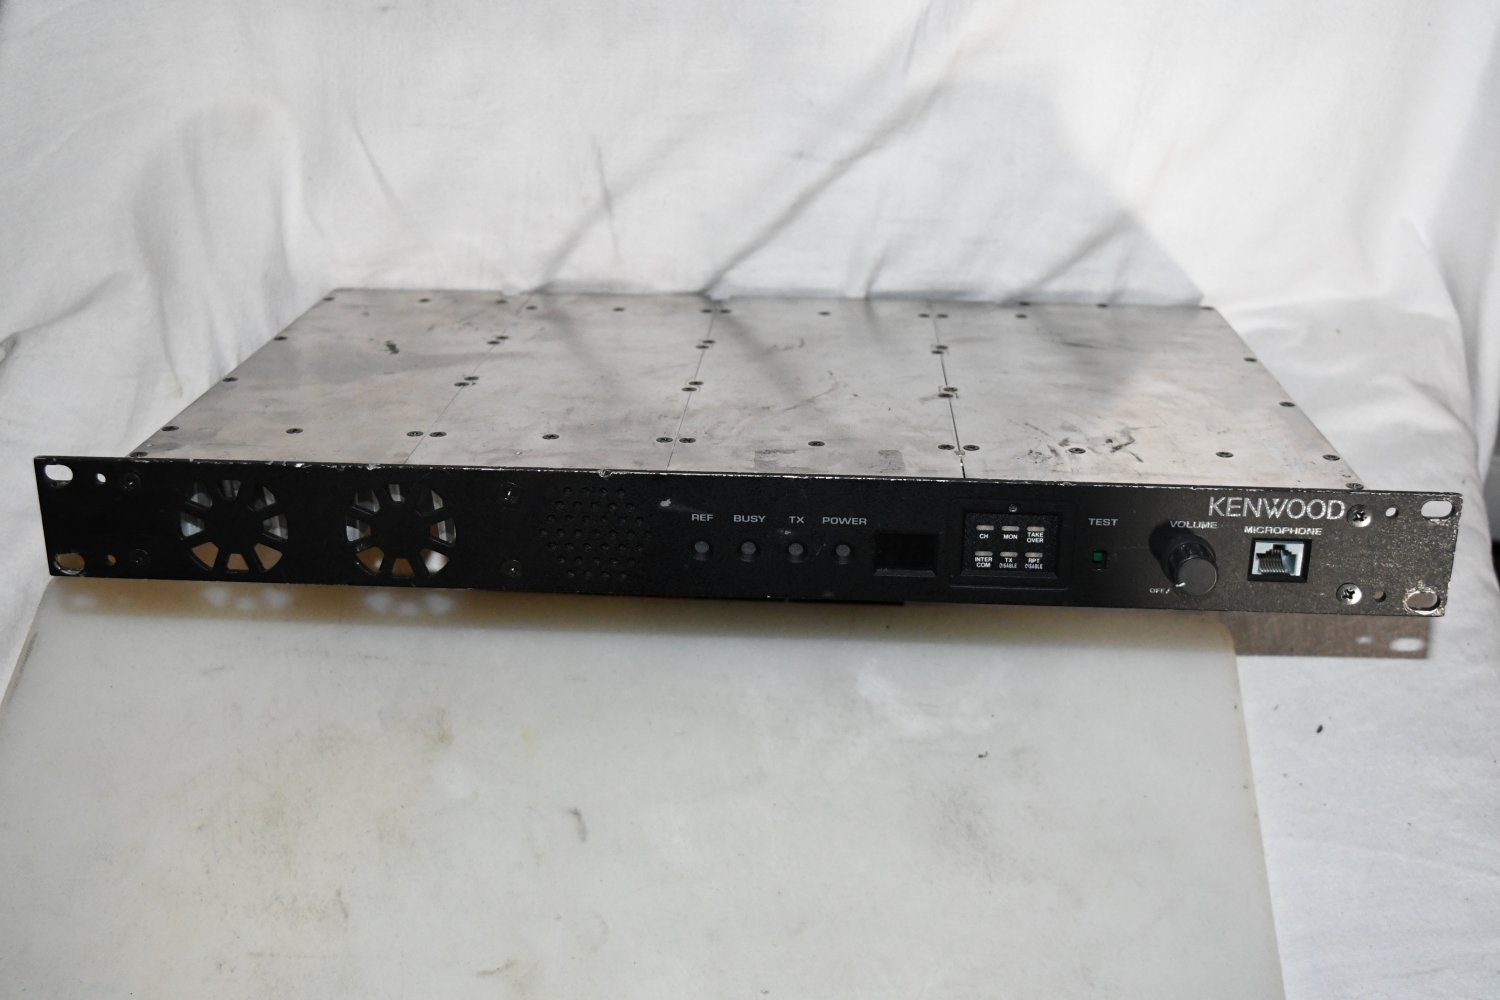 Kenwood TKR-740-2 VHF FM Repeater rare no ac plug as pictured 515c #1 10/21